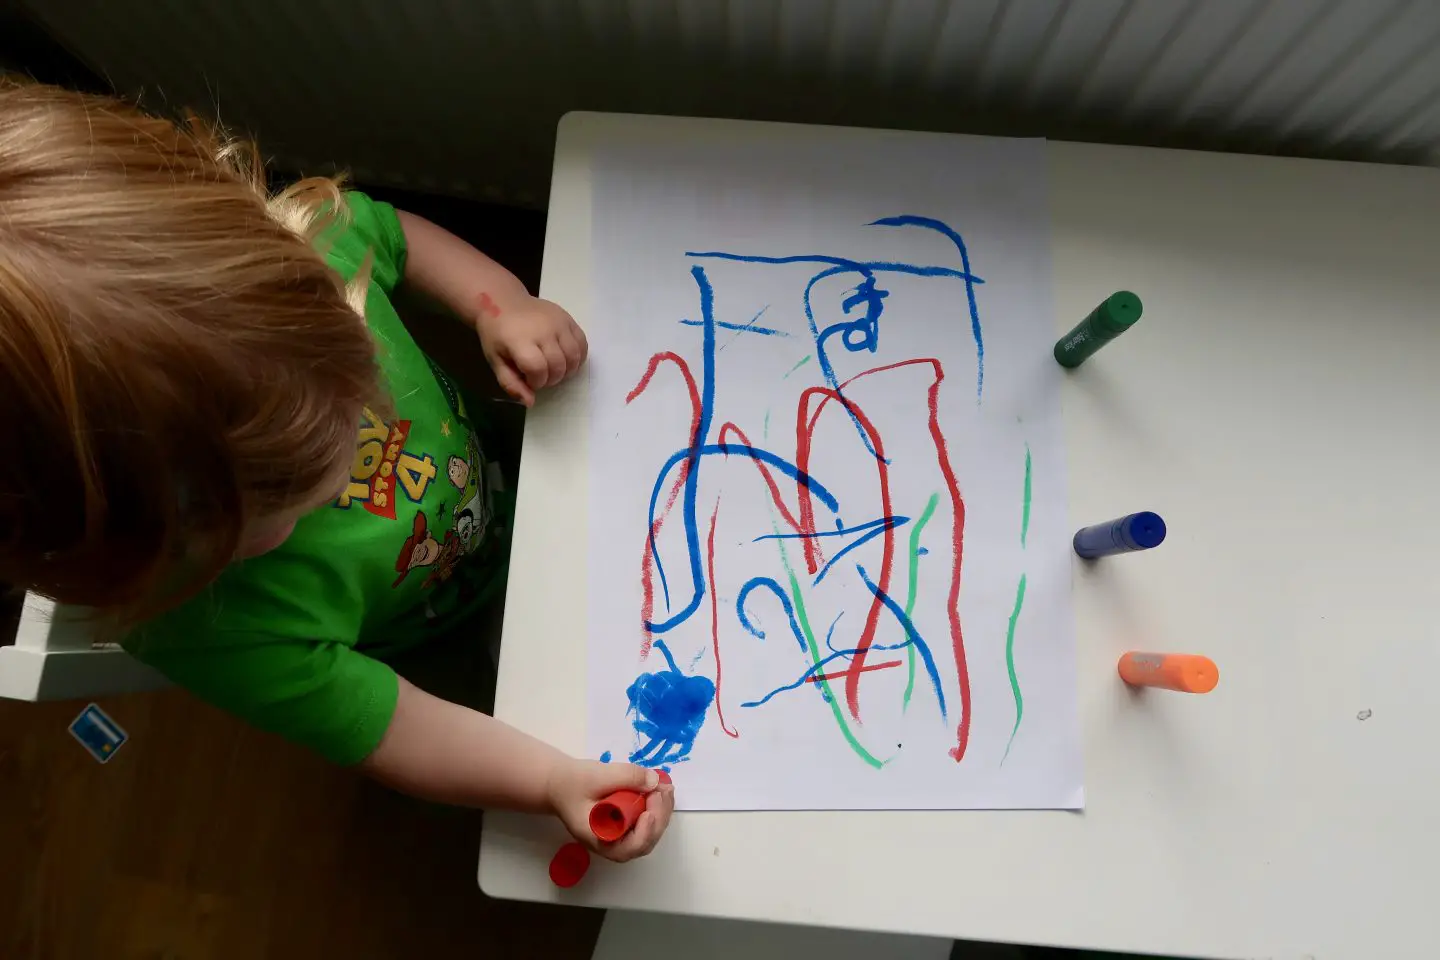 A top down view of a little boy at a small table drawing on paper with paint sticks